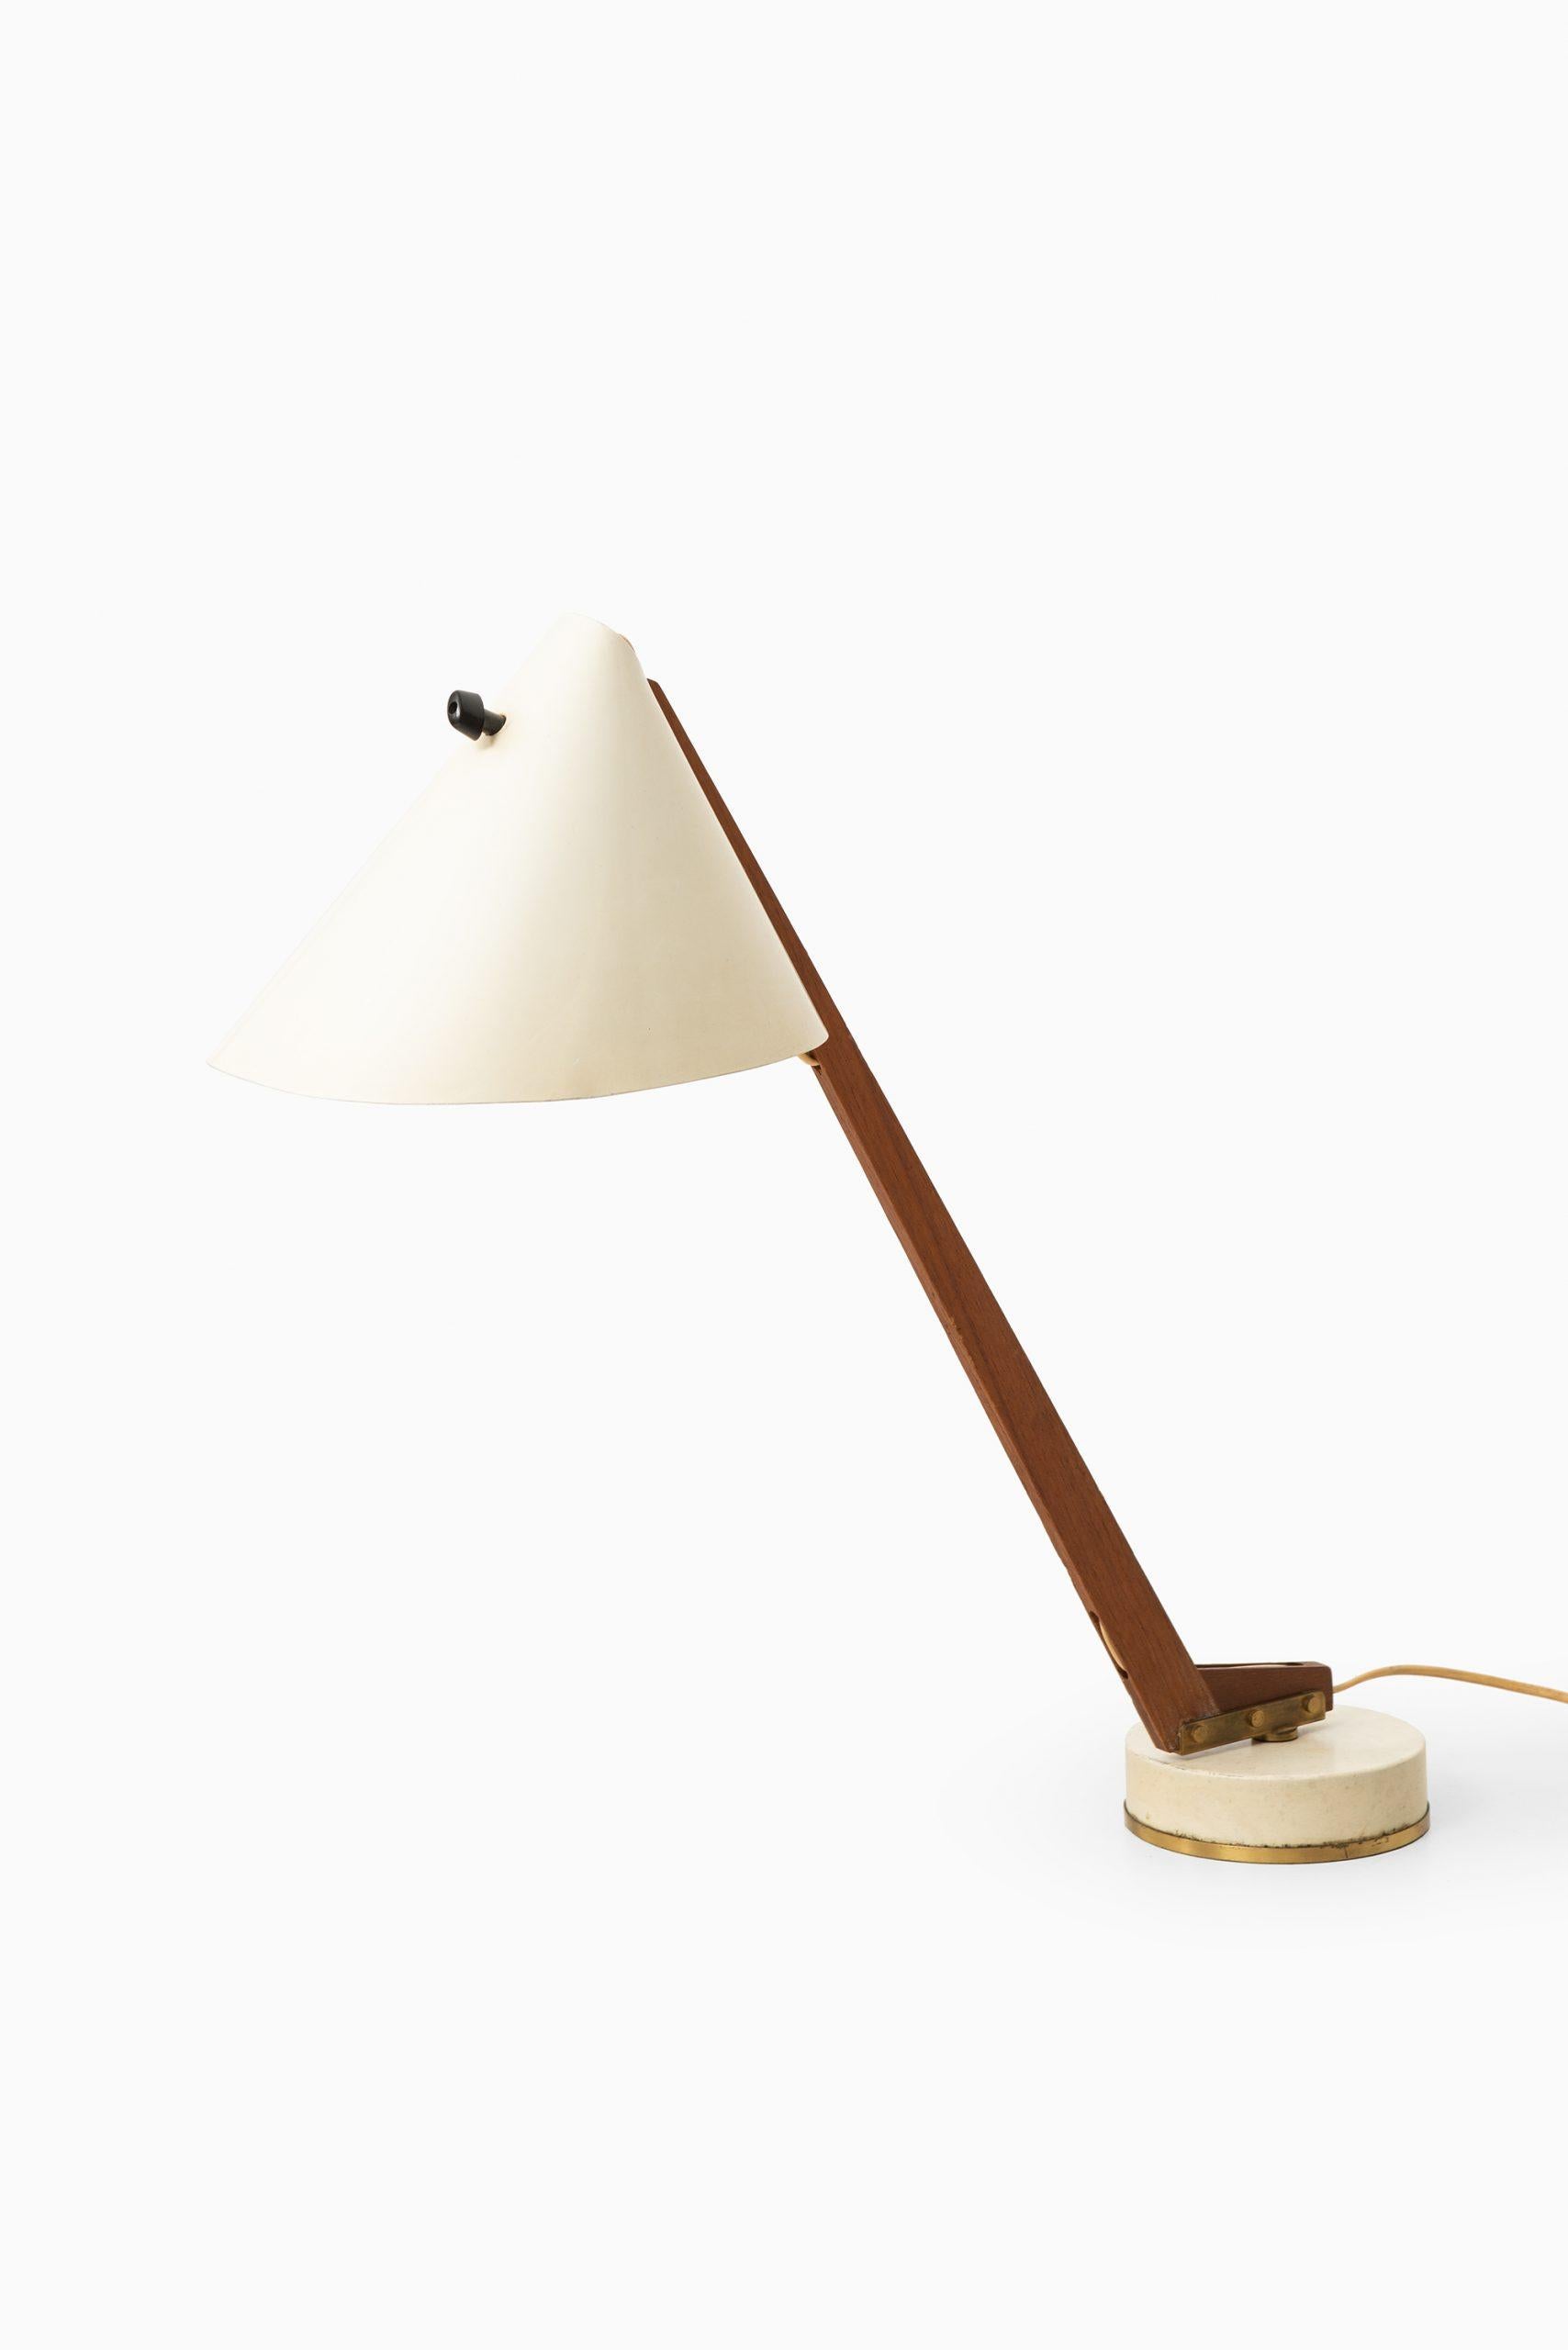 Hans-Agne Jakobsson Table Lamp Model B-54 Produced by Hans-Agne Jakobsson AB For Sale 3